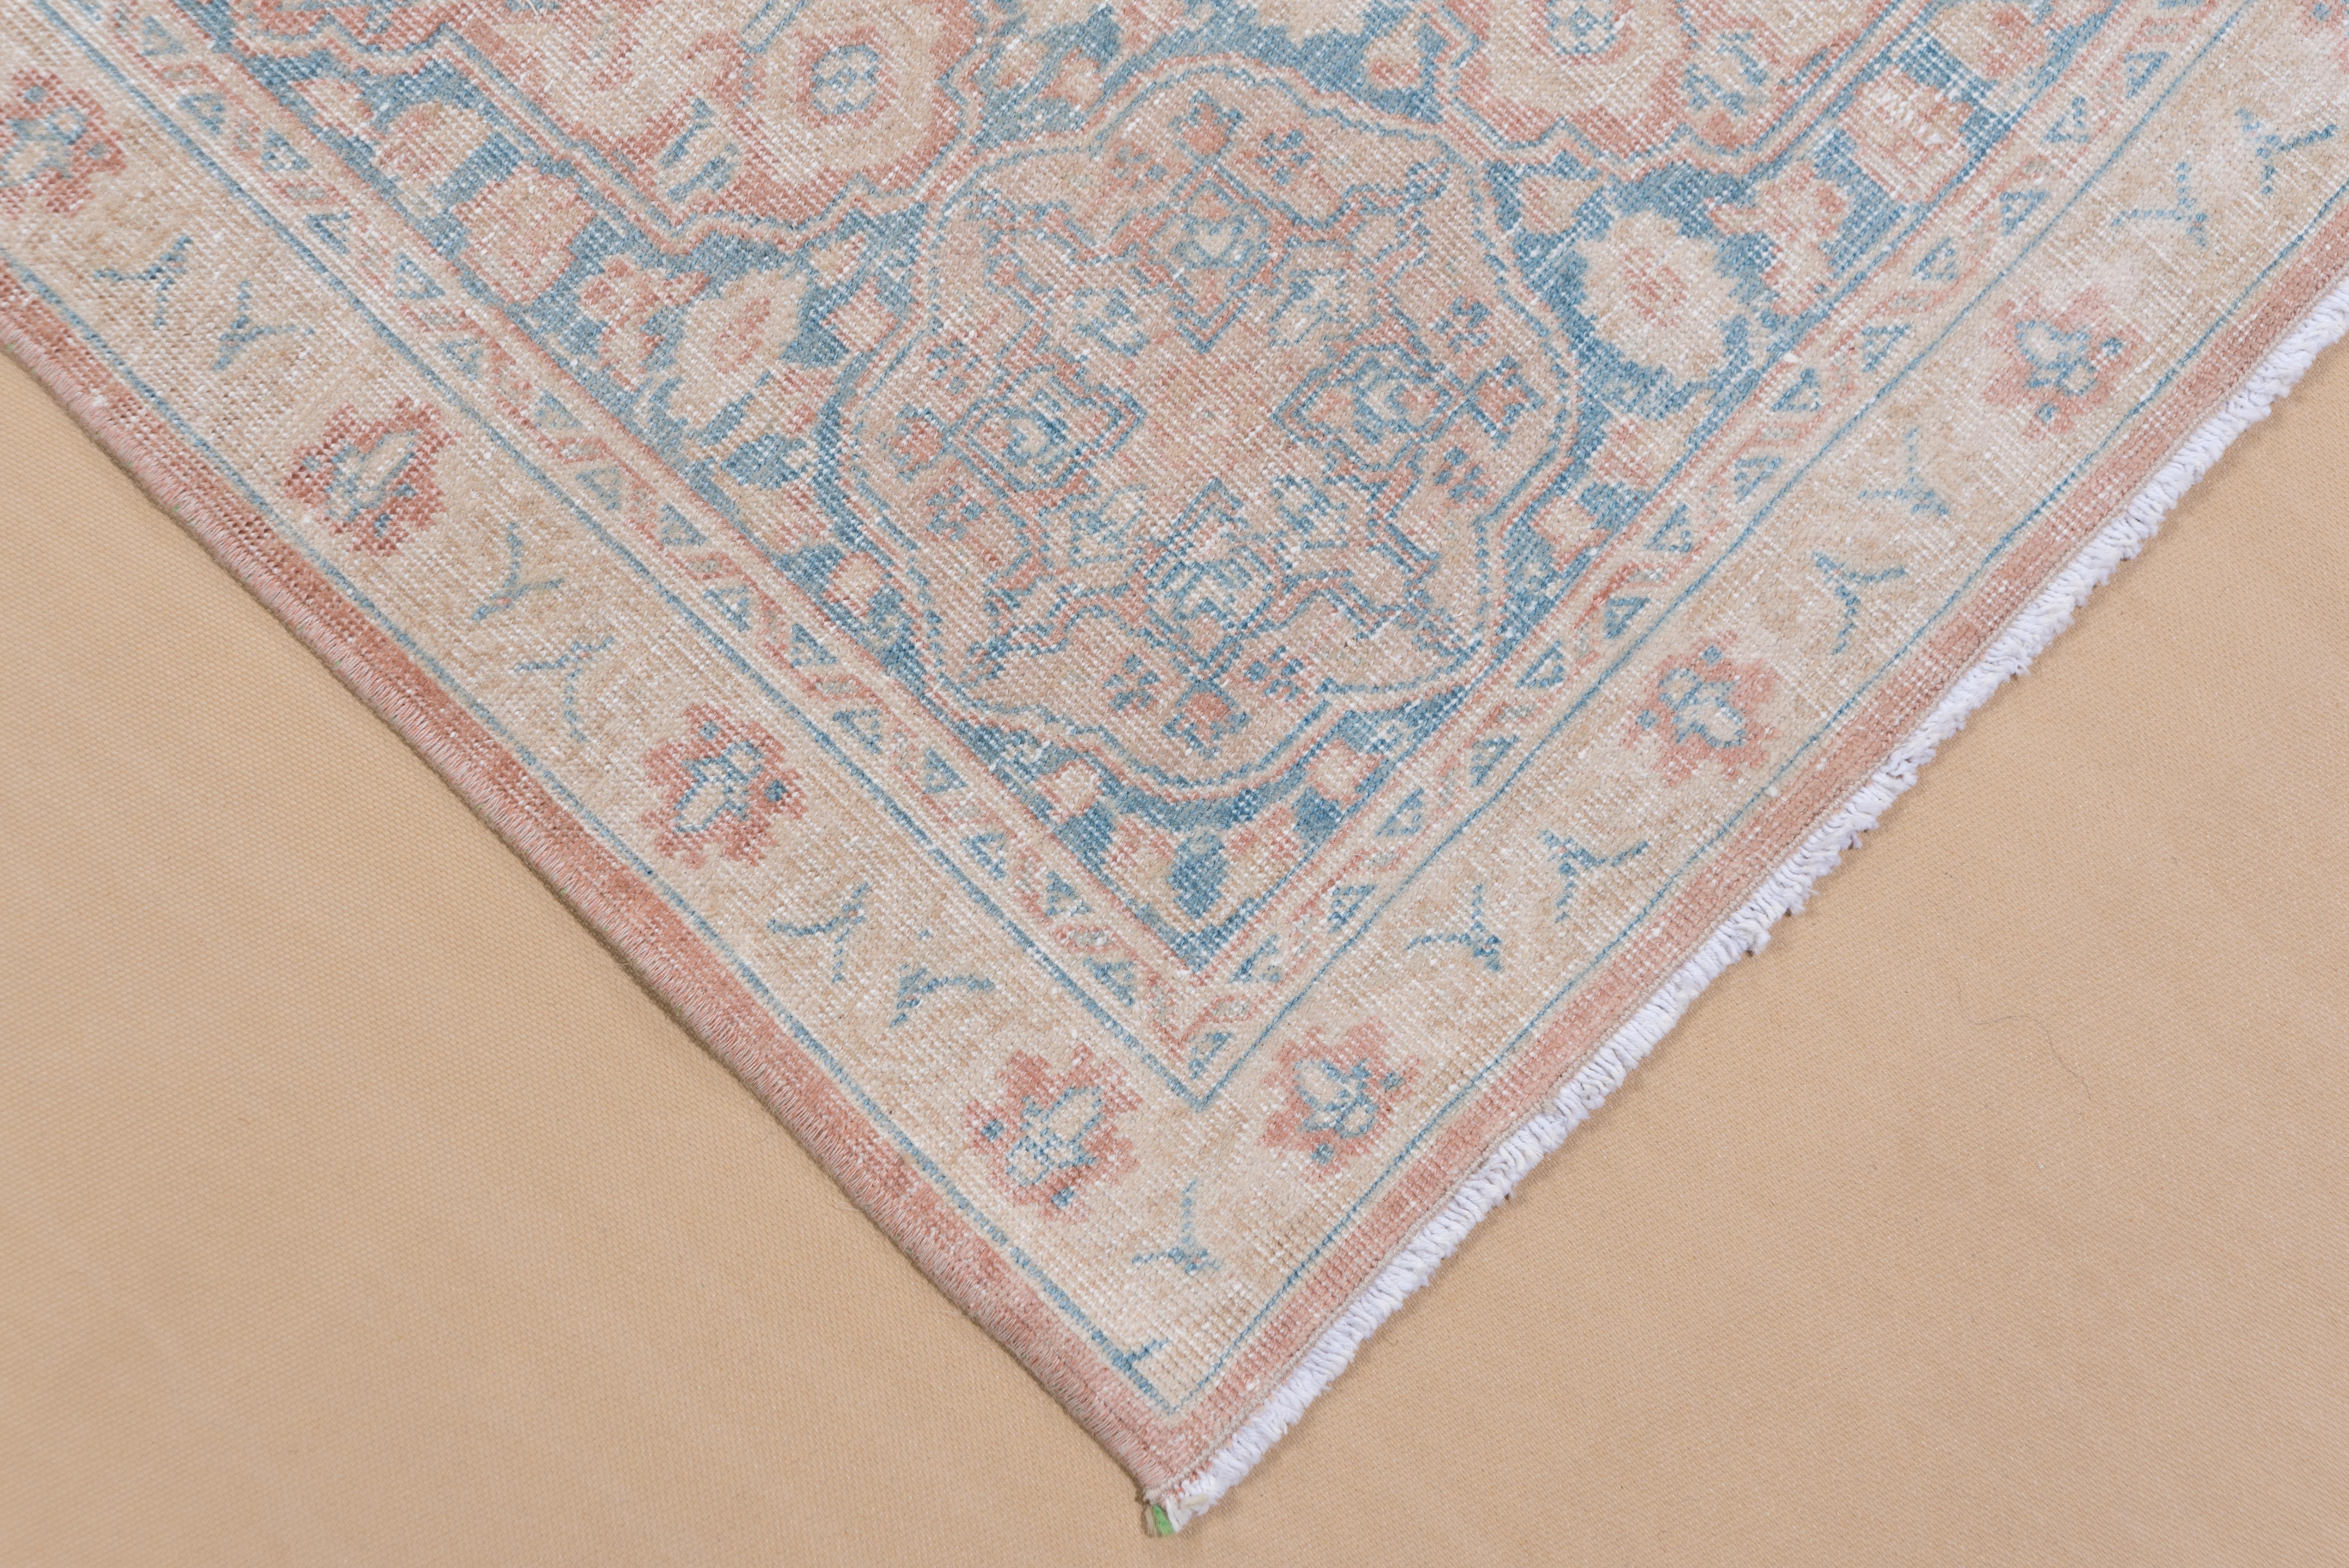 Vintage Persian Kashan Carpet with a Salmon Field and Blue Borders For Sale 3